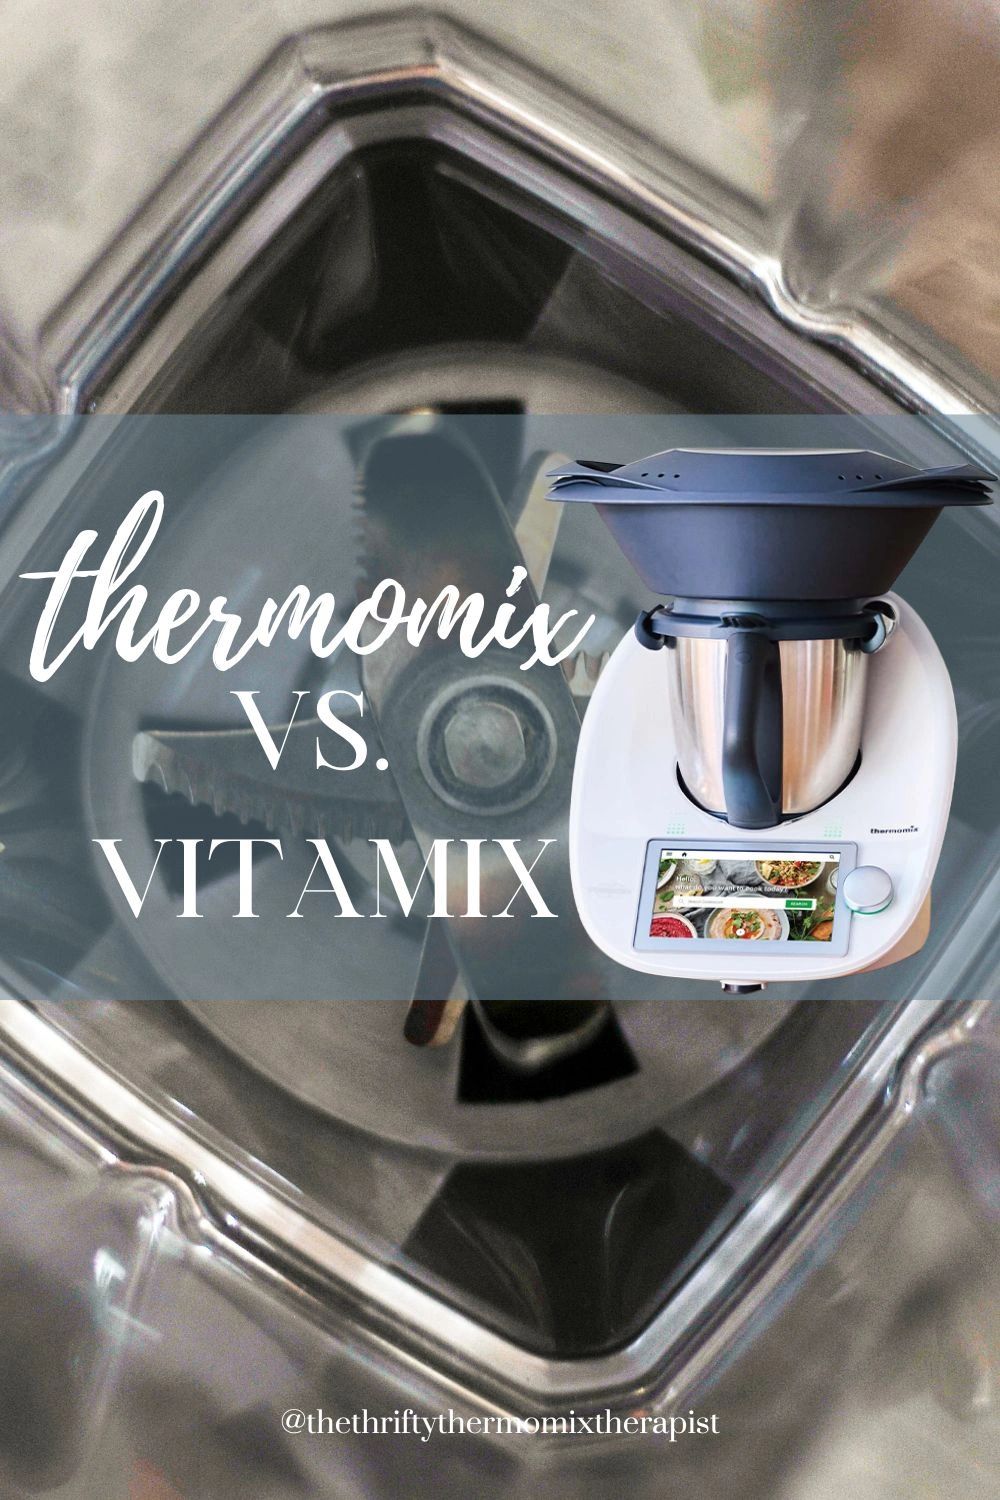 Thermomix vs Vitamix: Which One is Right for Busy Parents?